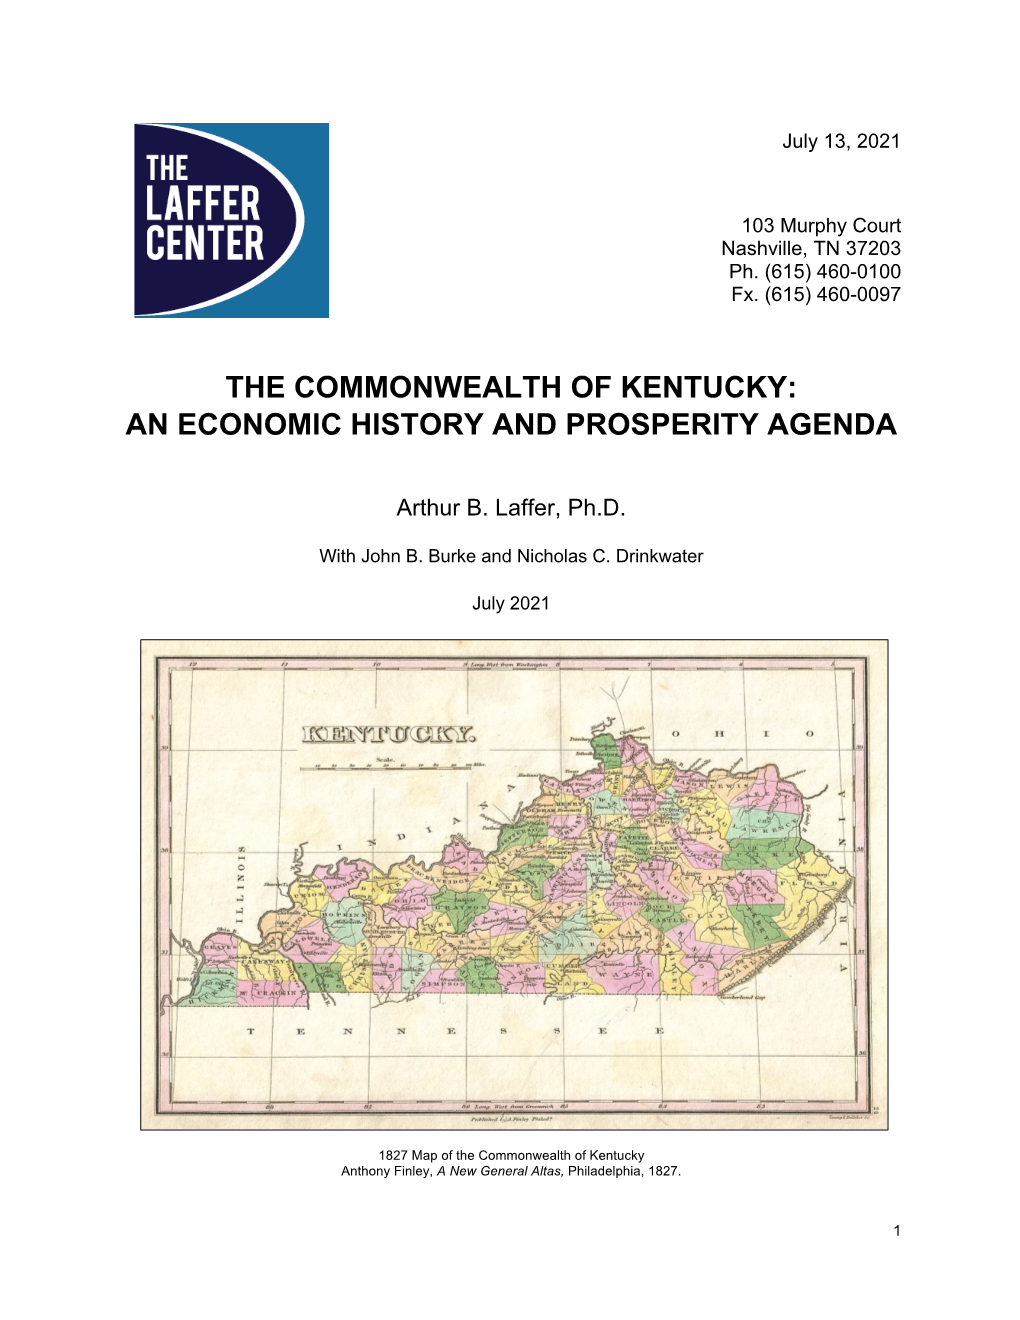 The Commonwealth of Kentucky: an Economic History and Prosperity Agenda